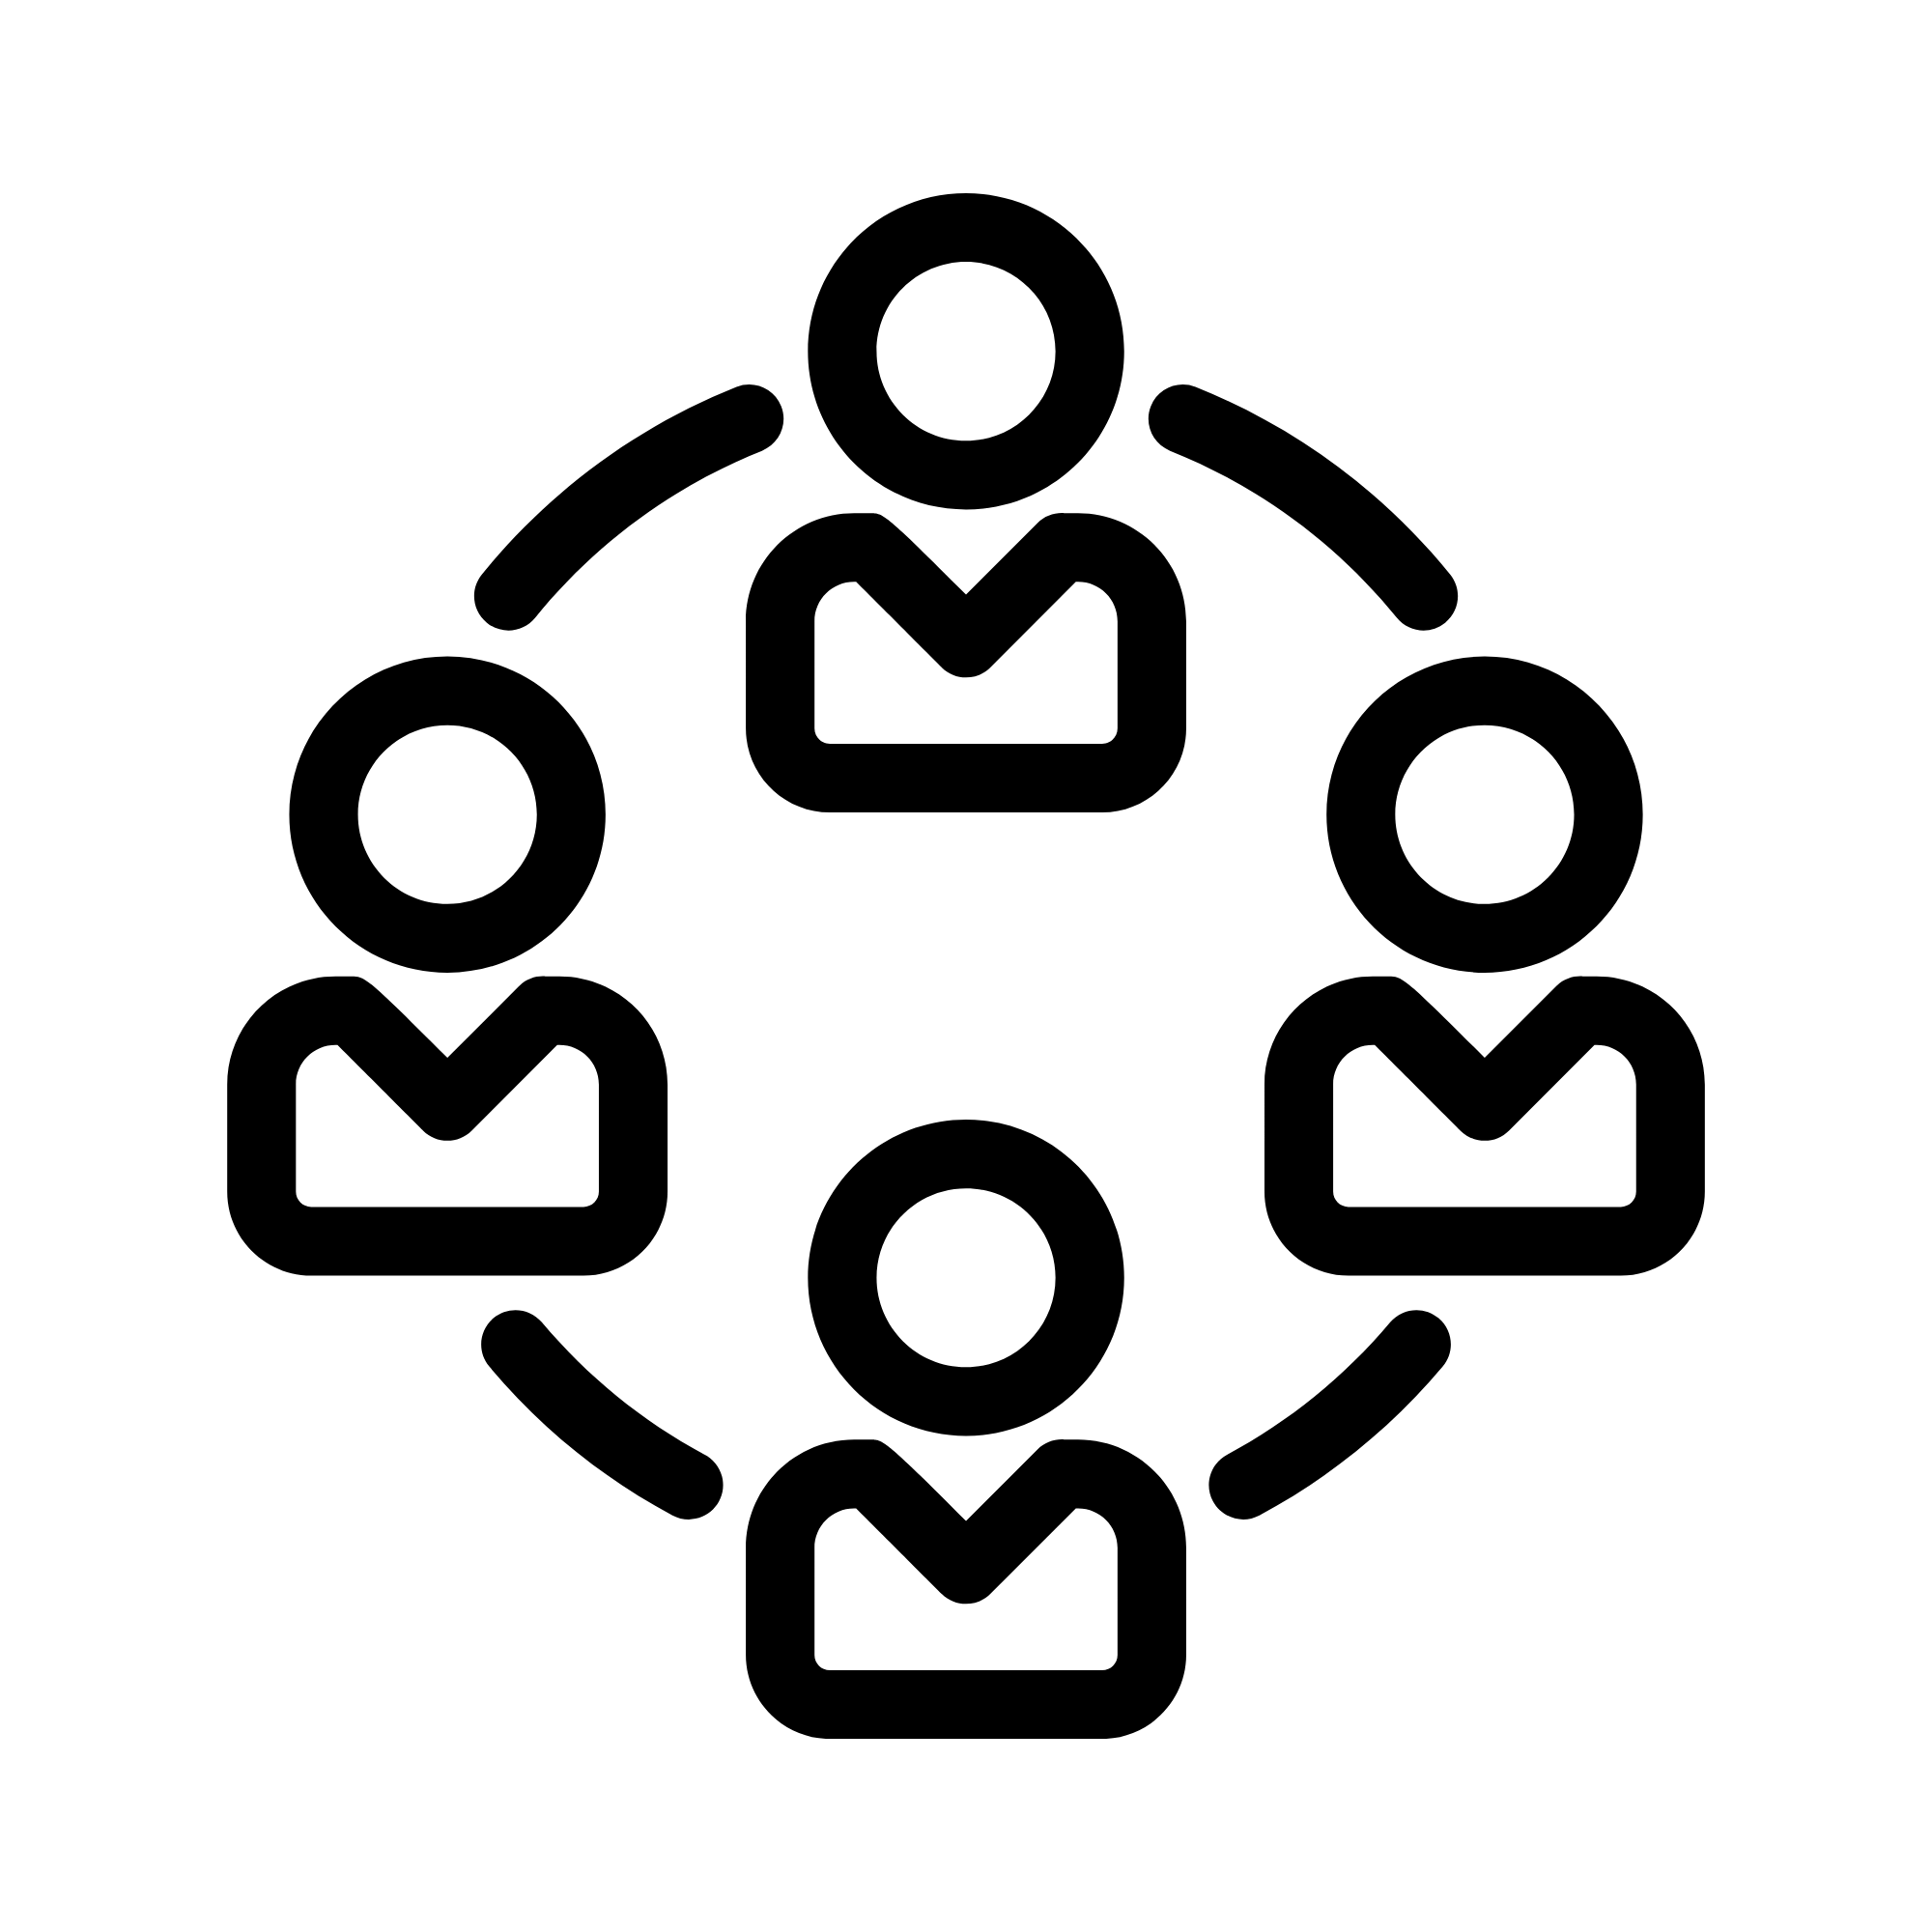 An icon representing Engagement with Senior Leaders, featuring a circle of interconnected human figures, part of IMDA’s AIM Programme